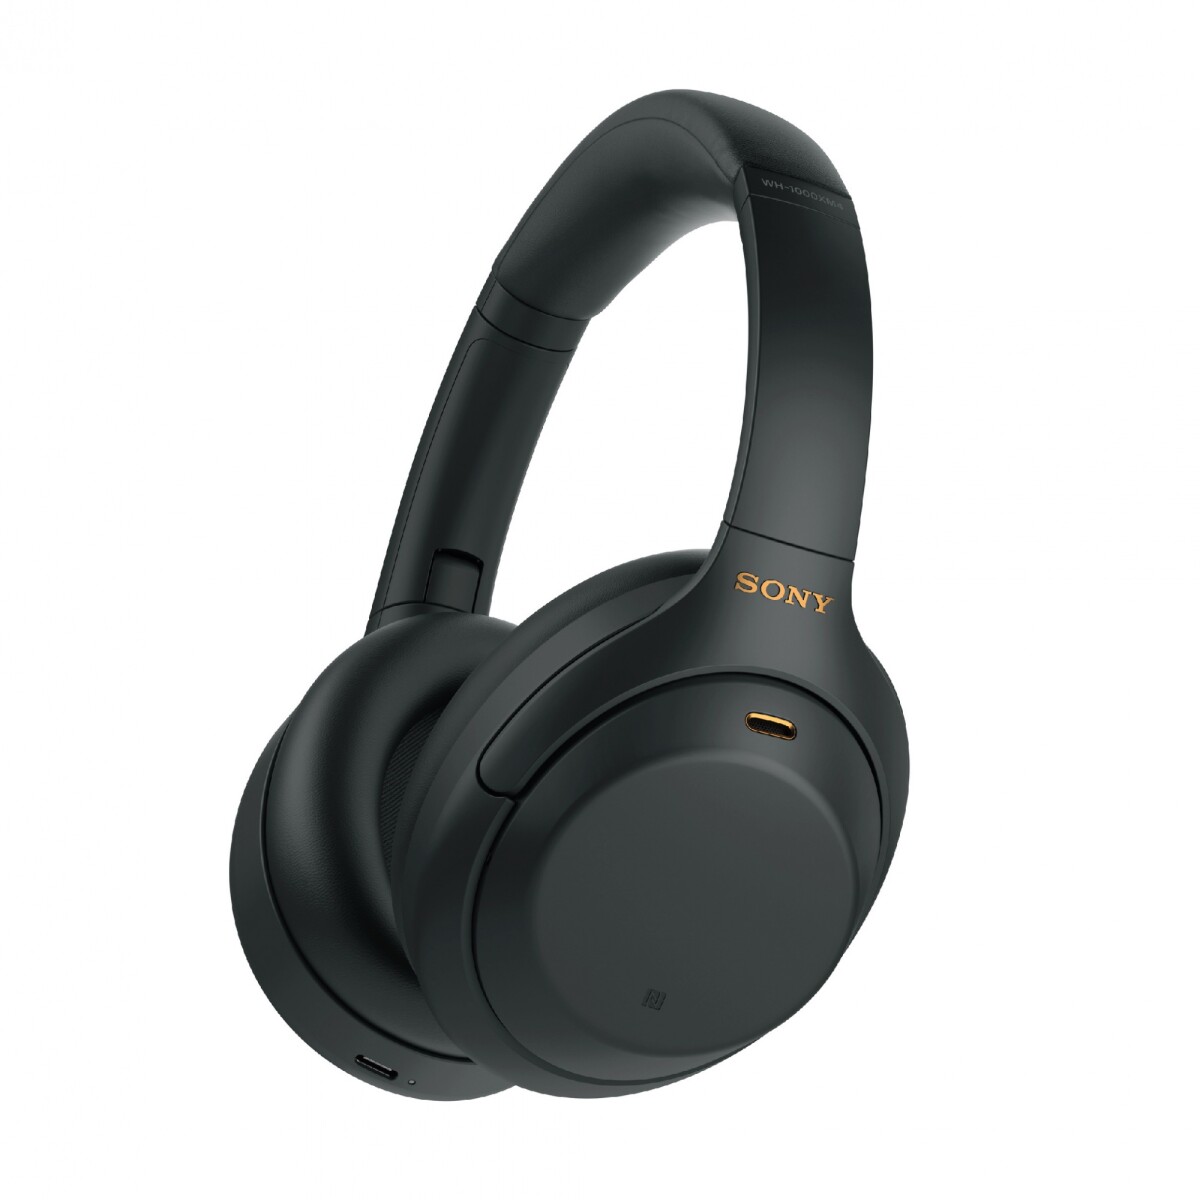 Auriculares inalámbricos Sony con Noise Cancelling WH-1000XM4 